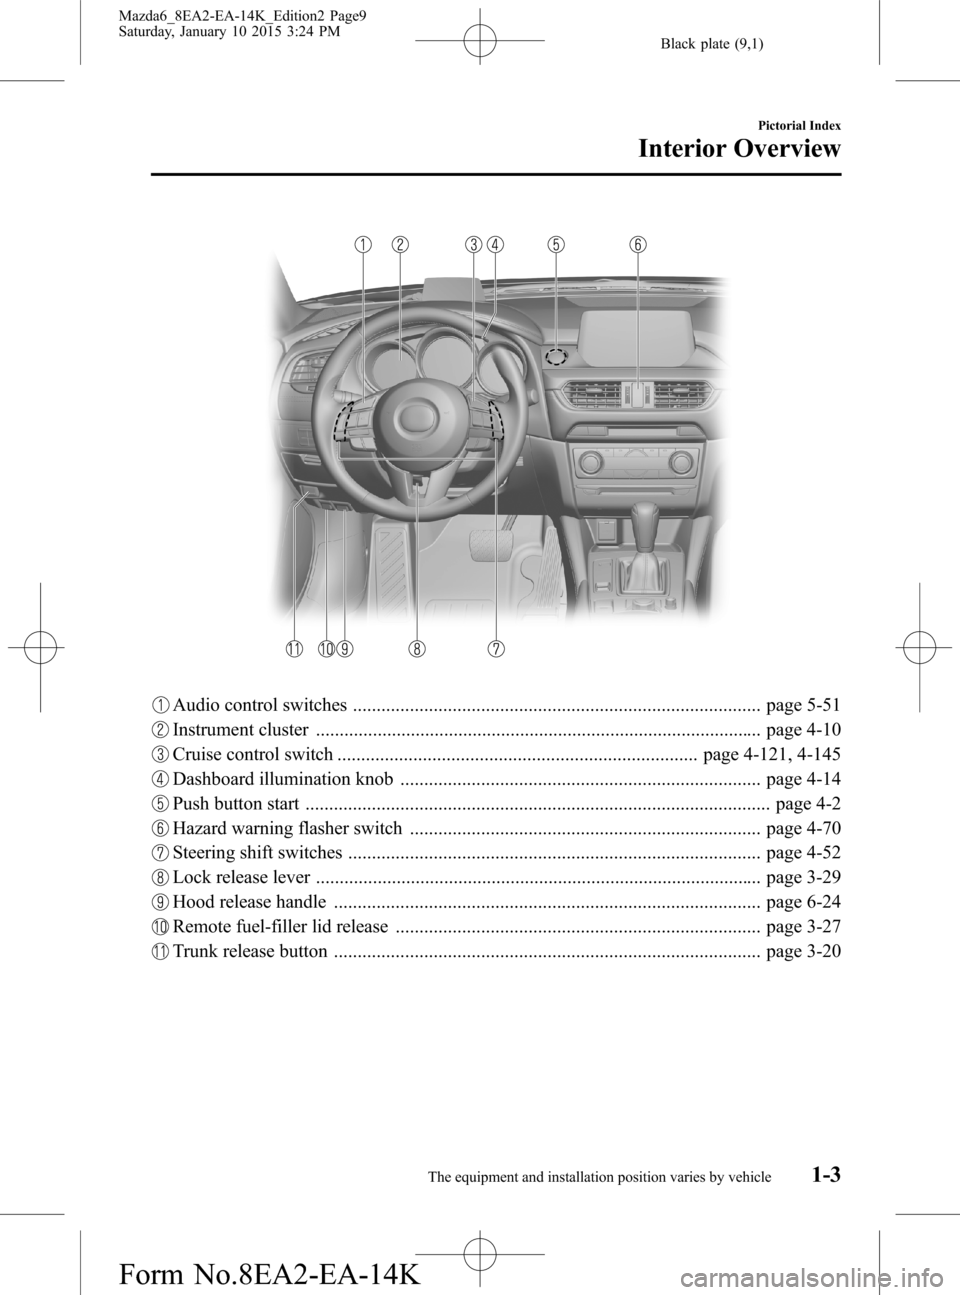 MAZDA MODEL 6 2016  Owners Manual (in English) Black plate (9,1)
Audio control switches ...................................................................................... page 5-51
Instrument cluster ...........................................